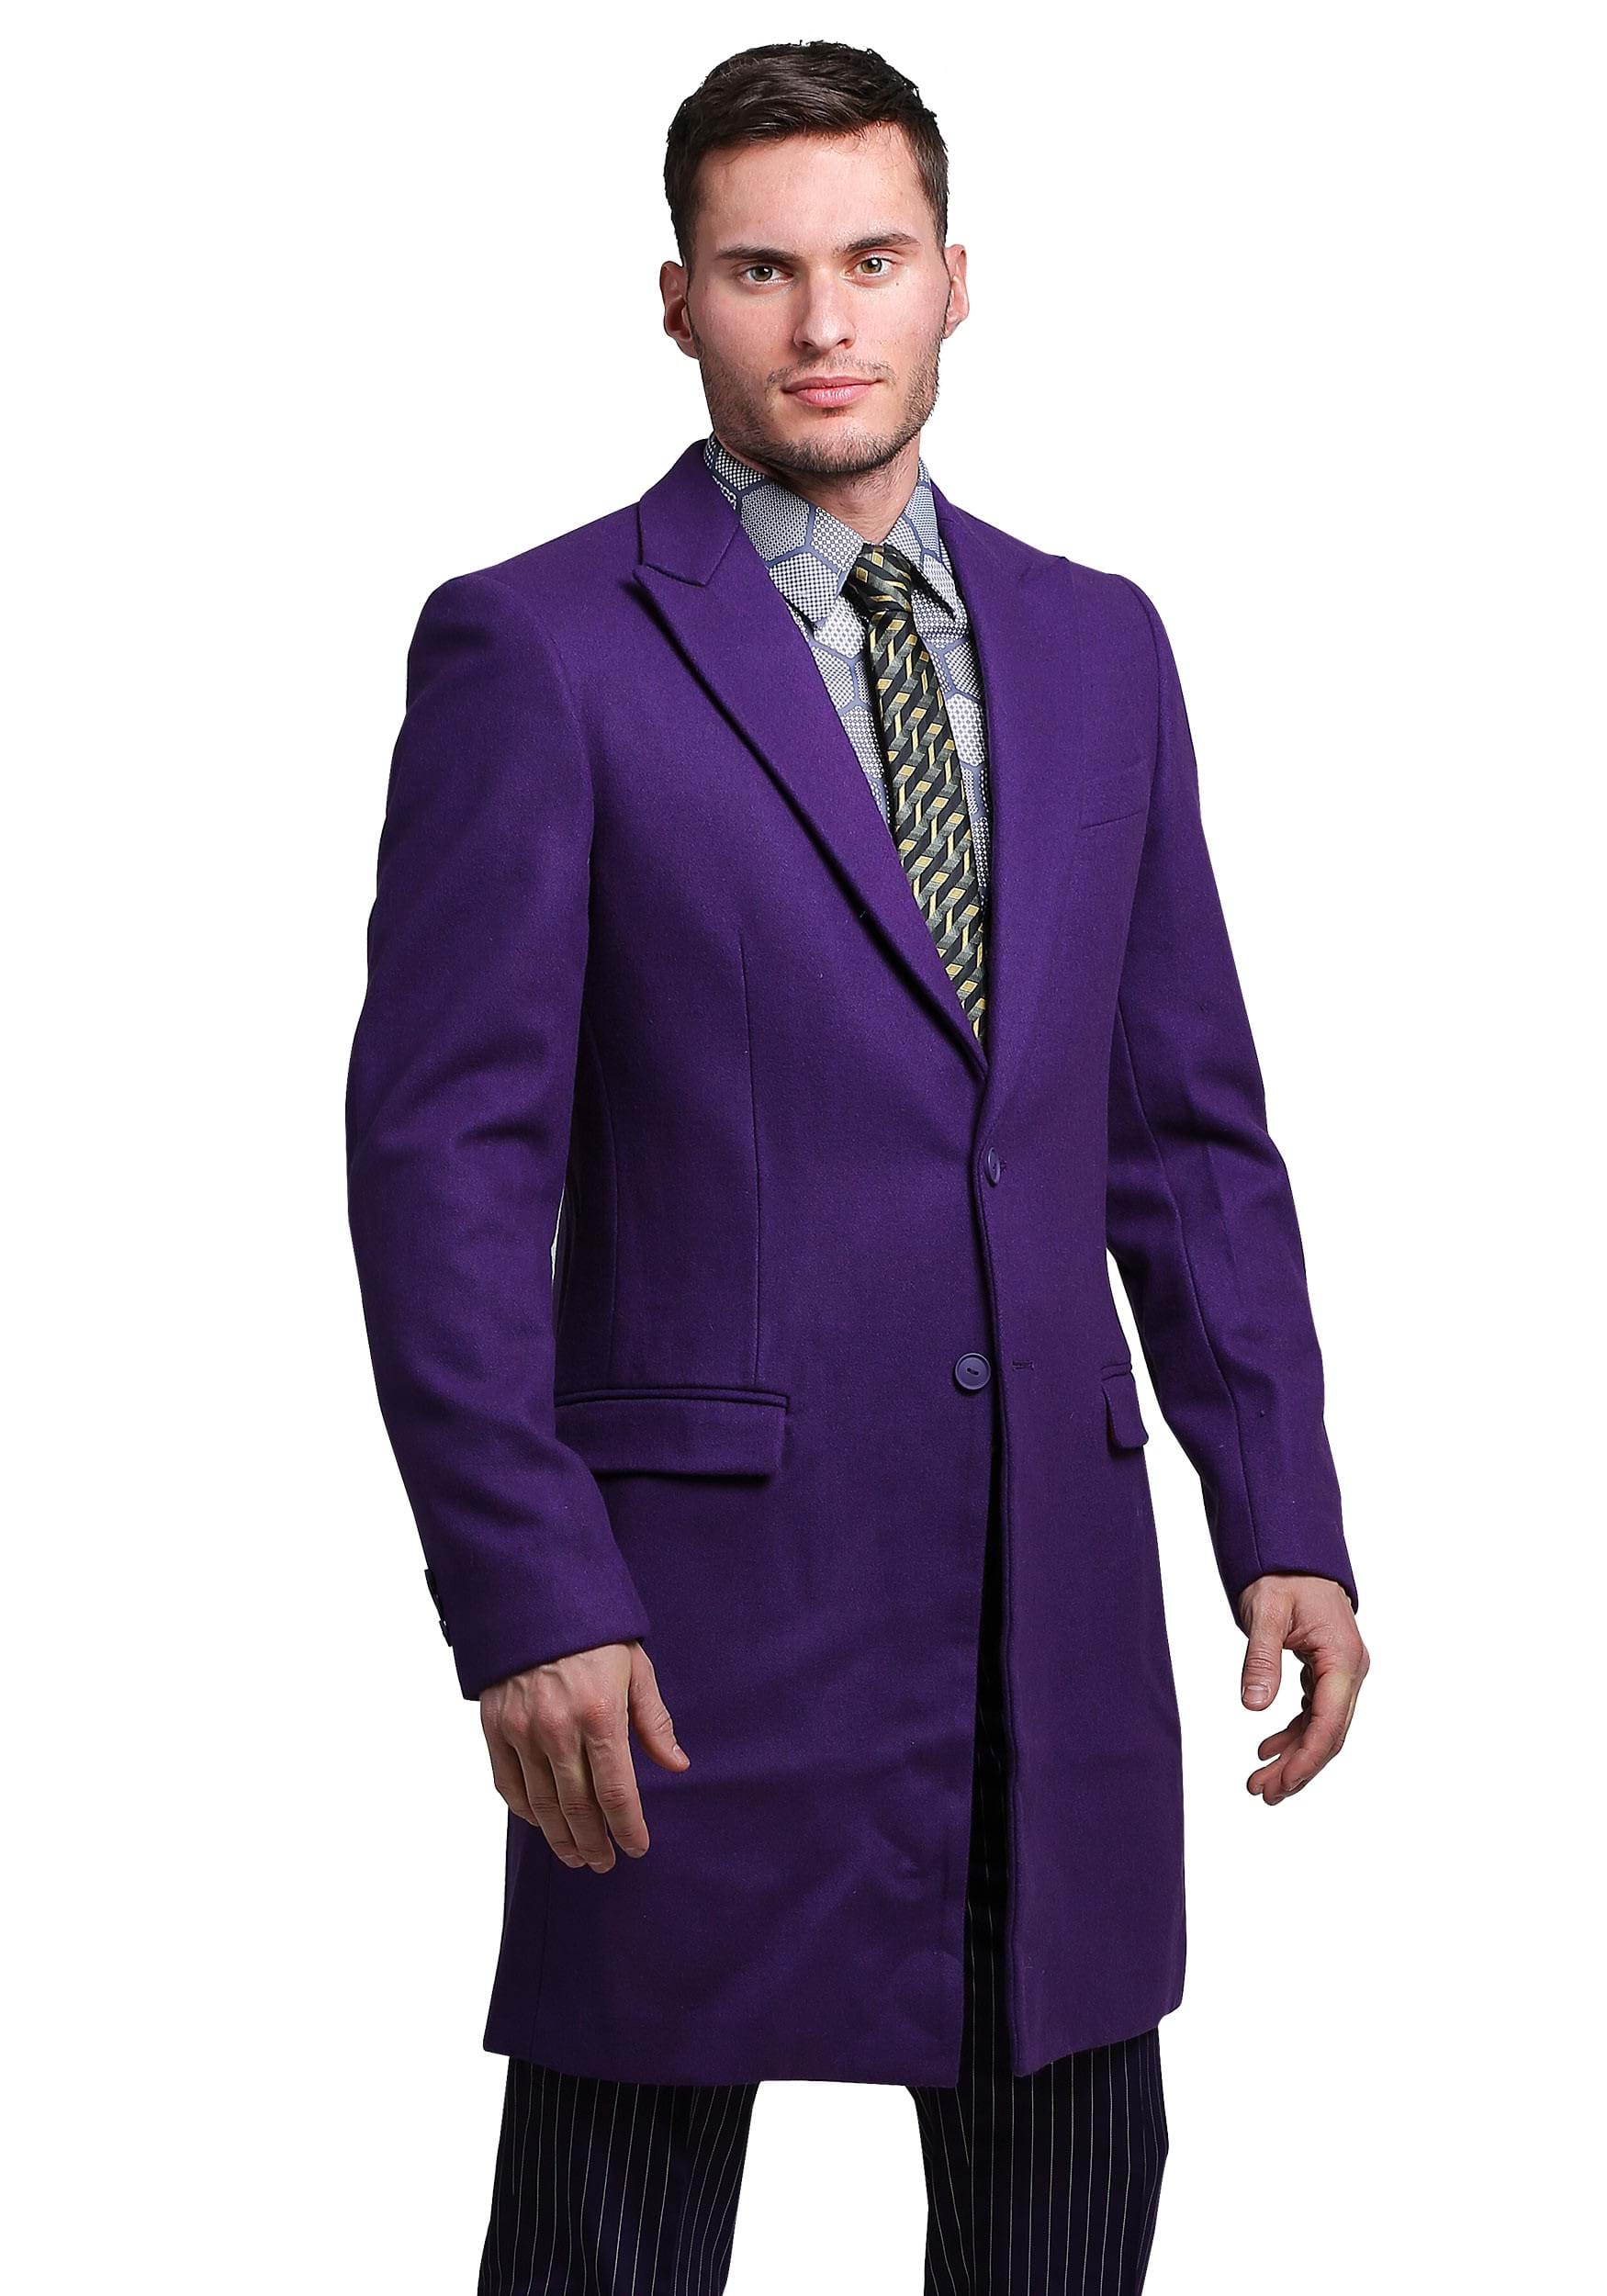 Image of THE JOKER Slim Fit Suit Overcoat (Authentic) ID FUN9011O-52